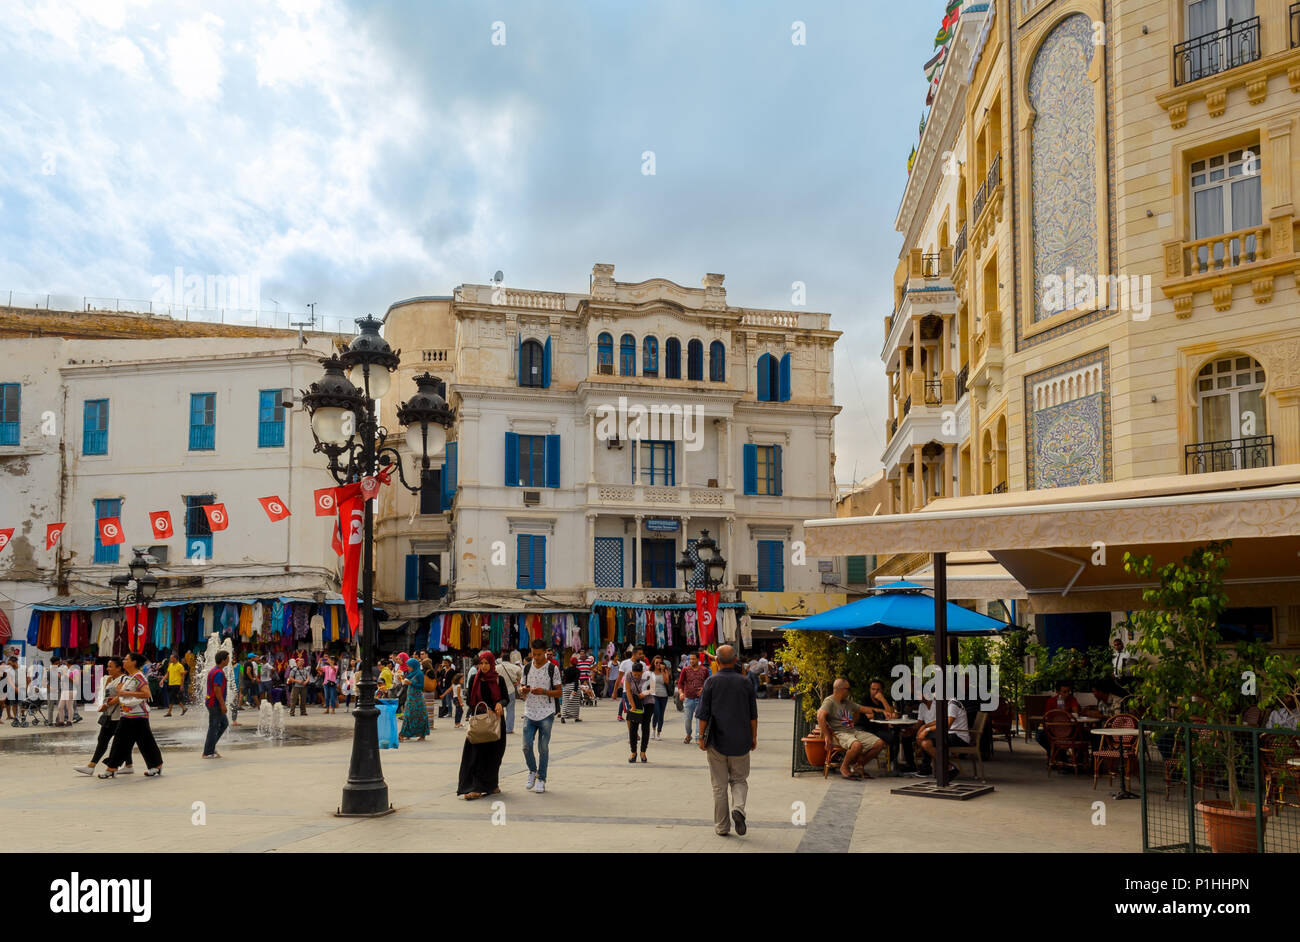 Tunisia, Tunis. September 17, 2016. Building on Victory Square in the center of the city Stock Photo